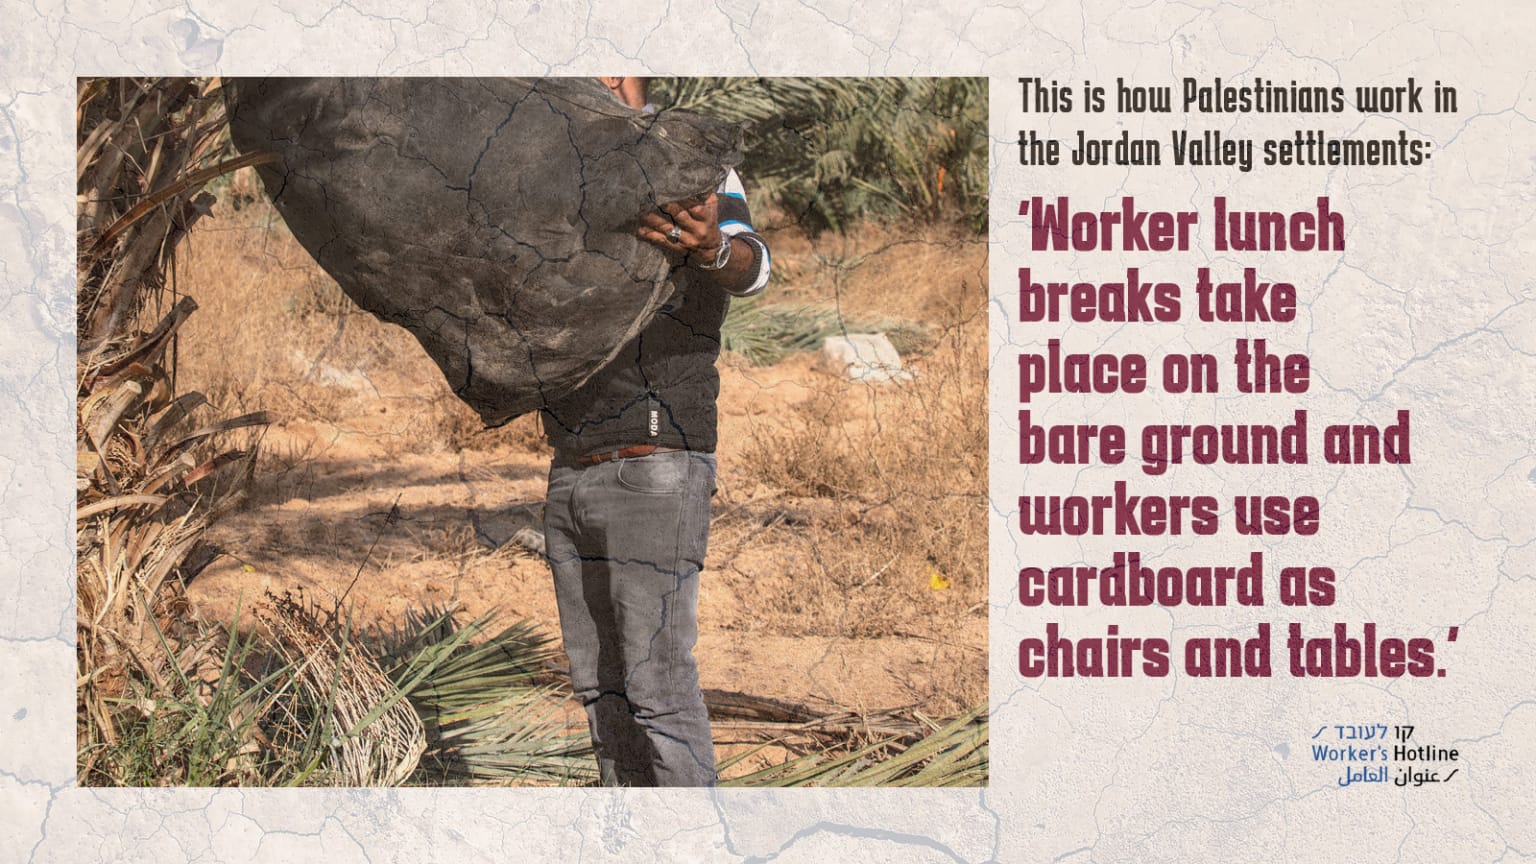 “Worker lunch breaks take place on the bare ground and workers use cardboard as chairs and tables.”